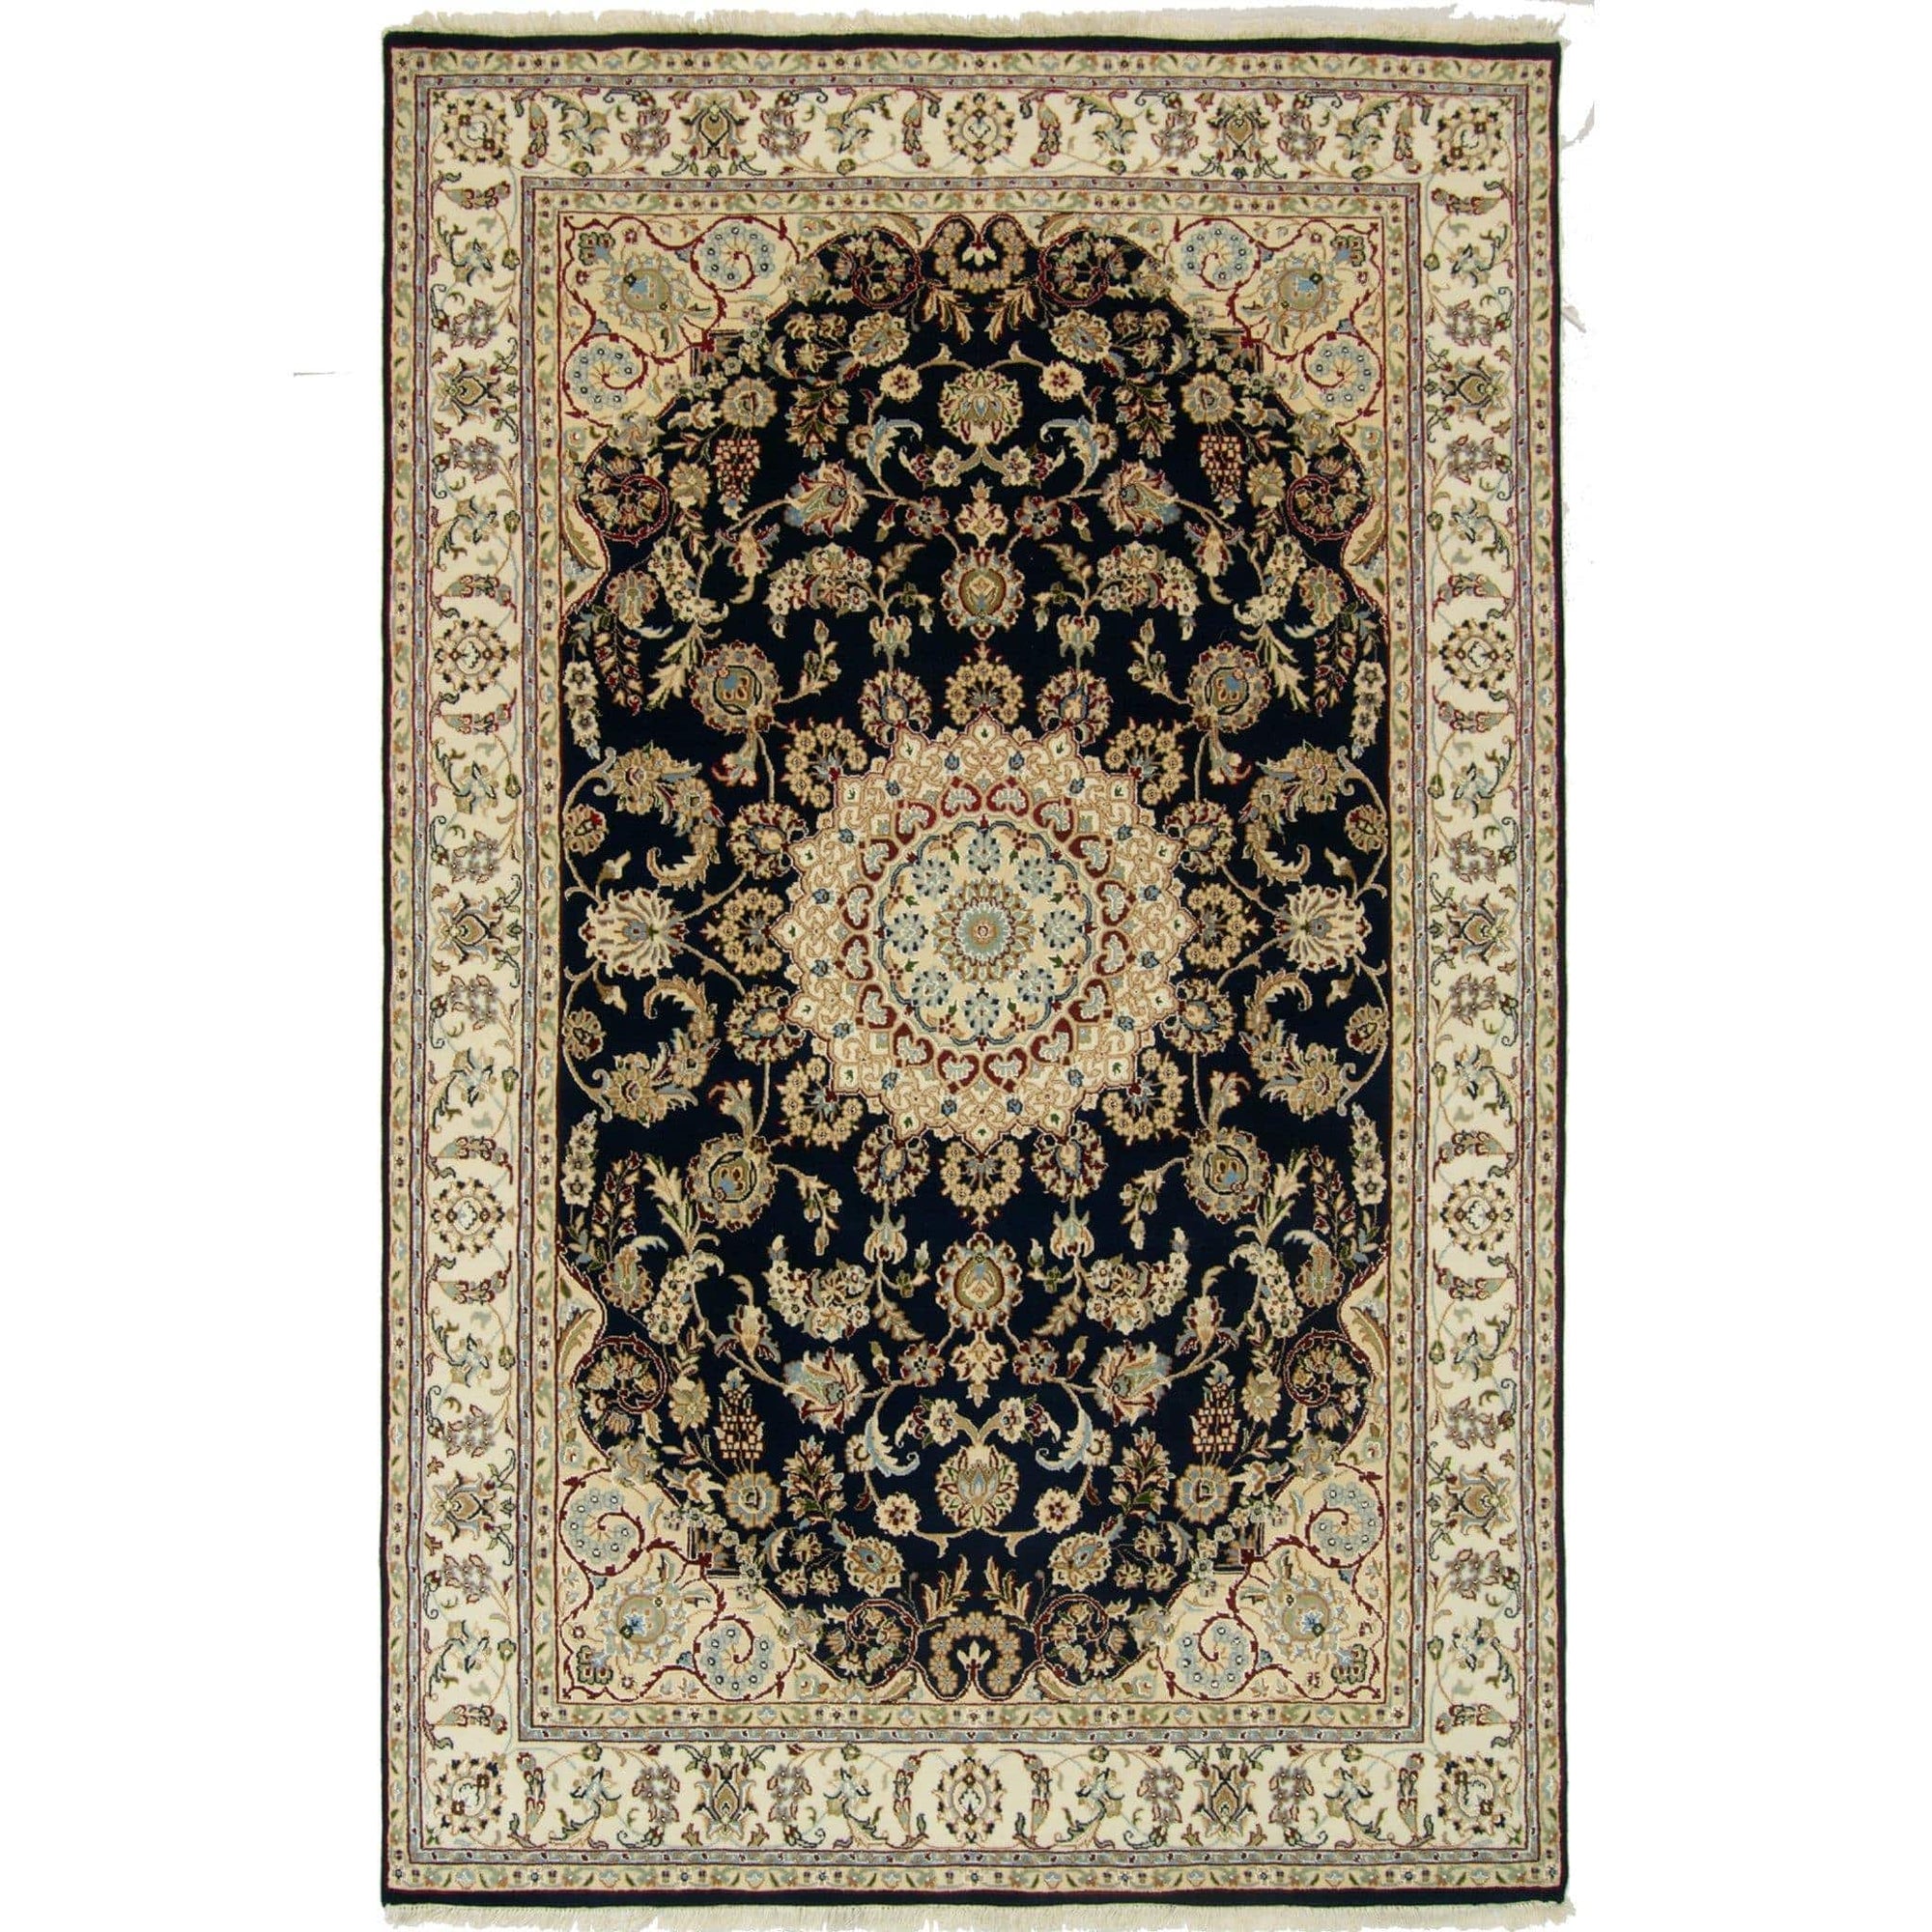 Fine Hand-knotted Wool & Silk Nain Rug 198cm x 305cm